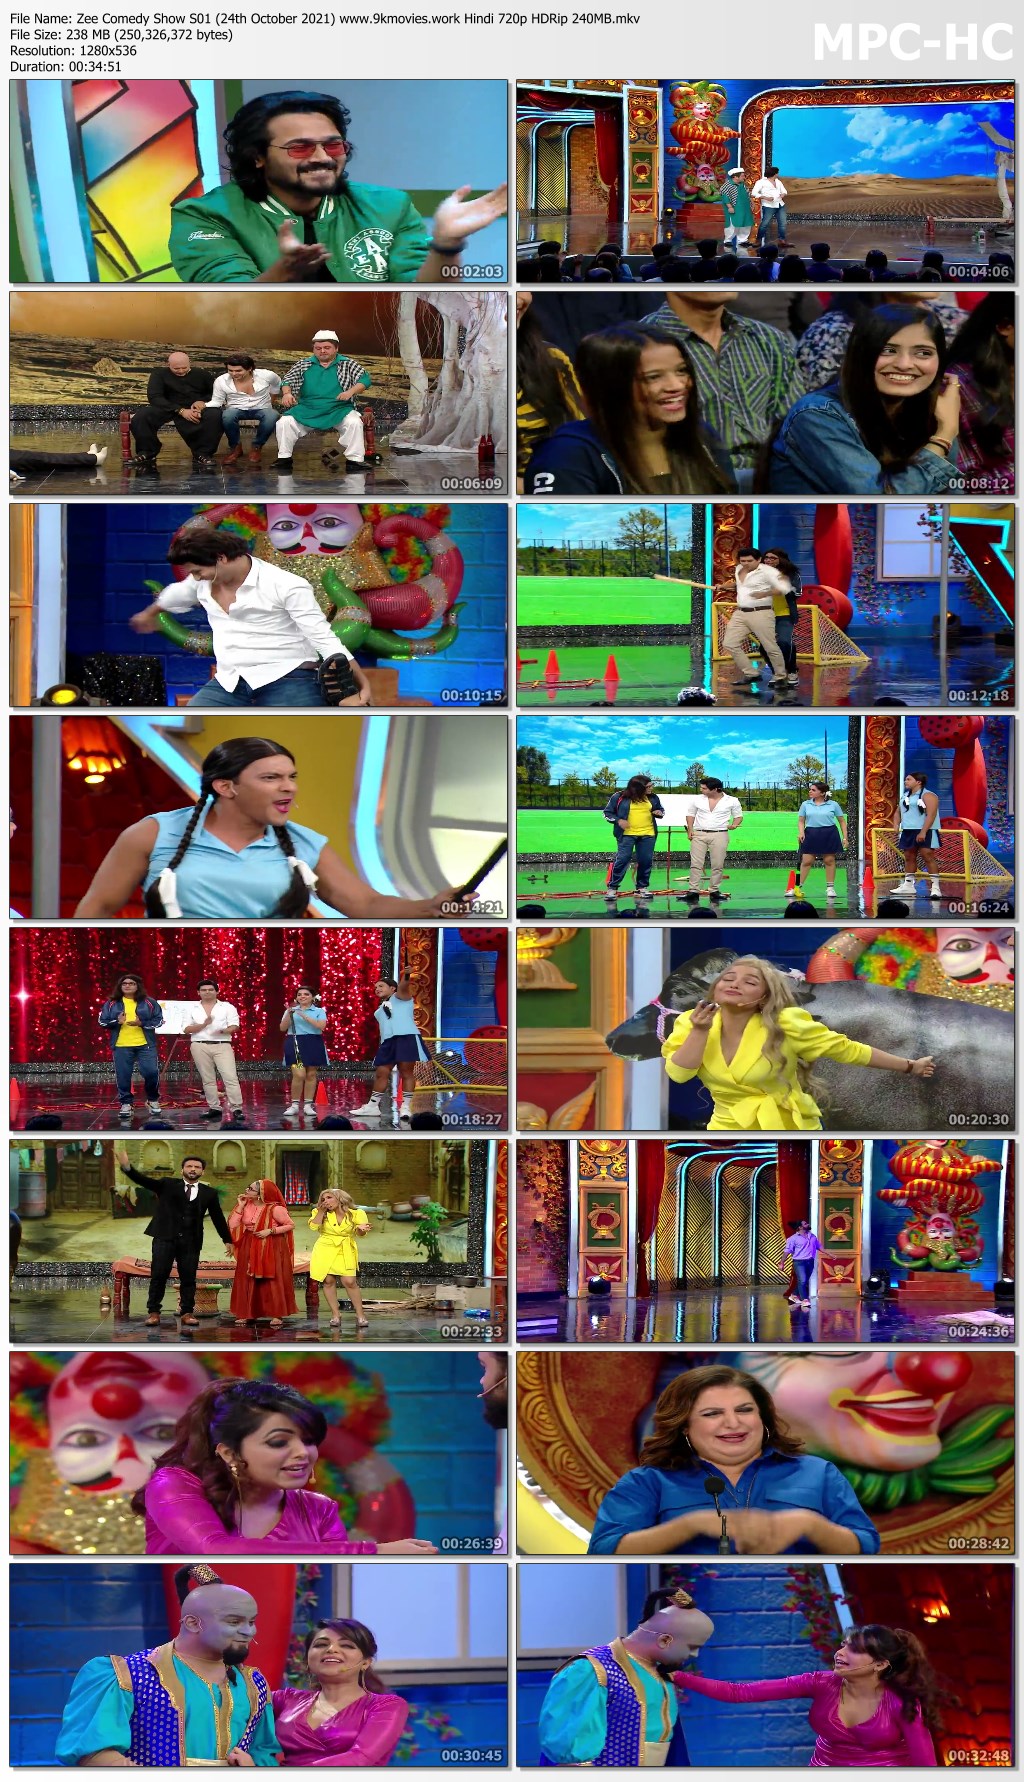 Zee Comedy Show S01 24th October 2021 www.9kmovies.work Hindi 720p HDRip 240MB.mkv thumbsdc8ecec13d029138